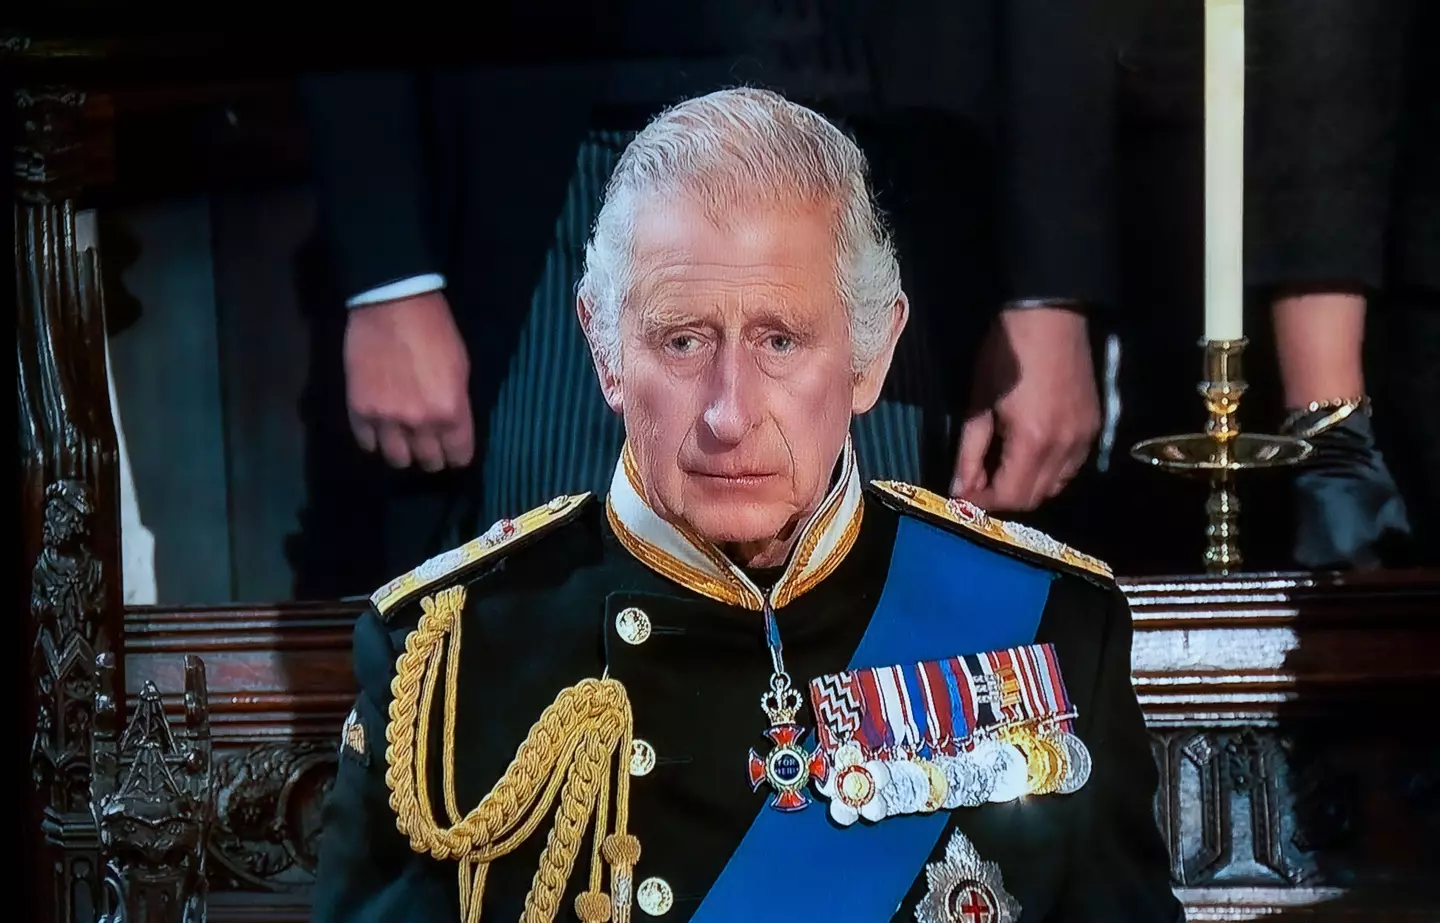 The public will no longer be invited to pledge allegiance to King Charles III.